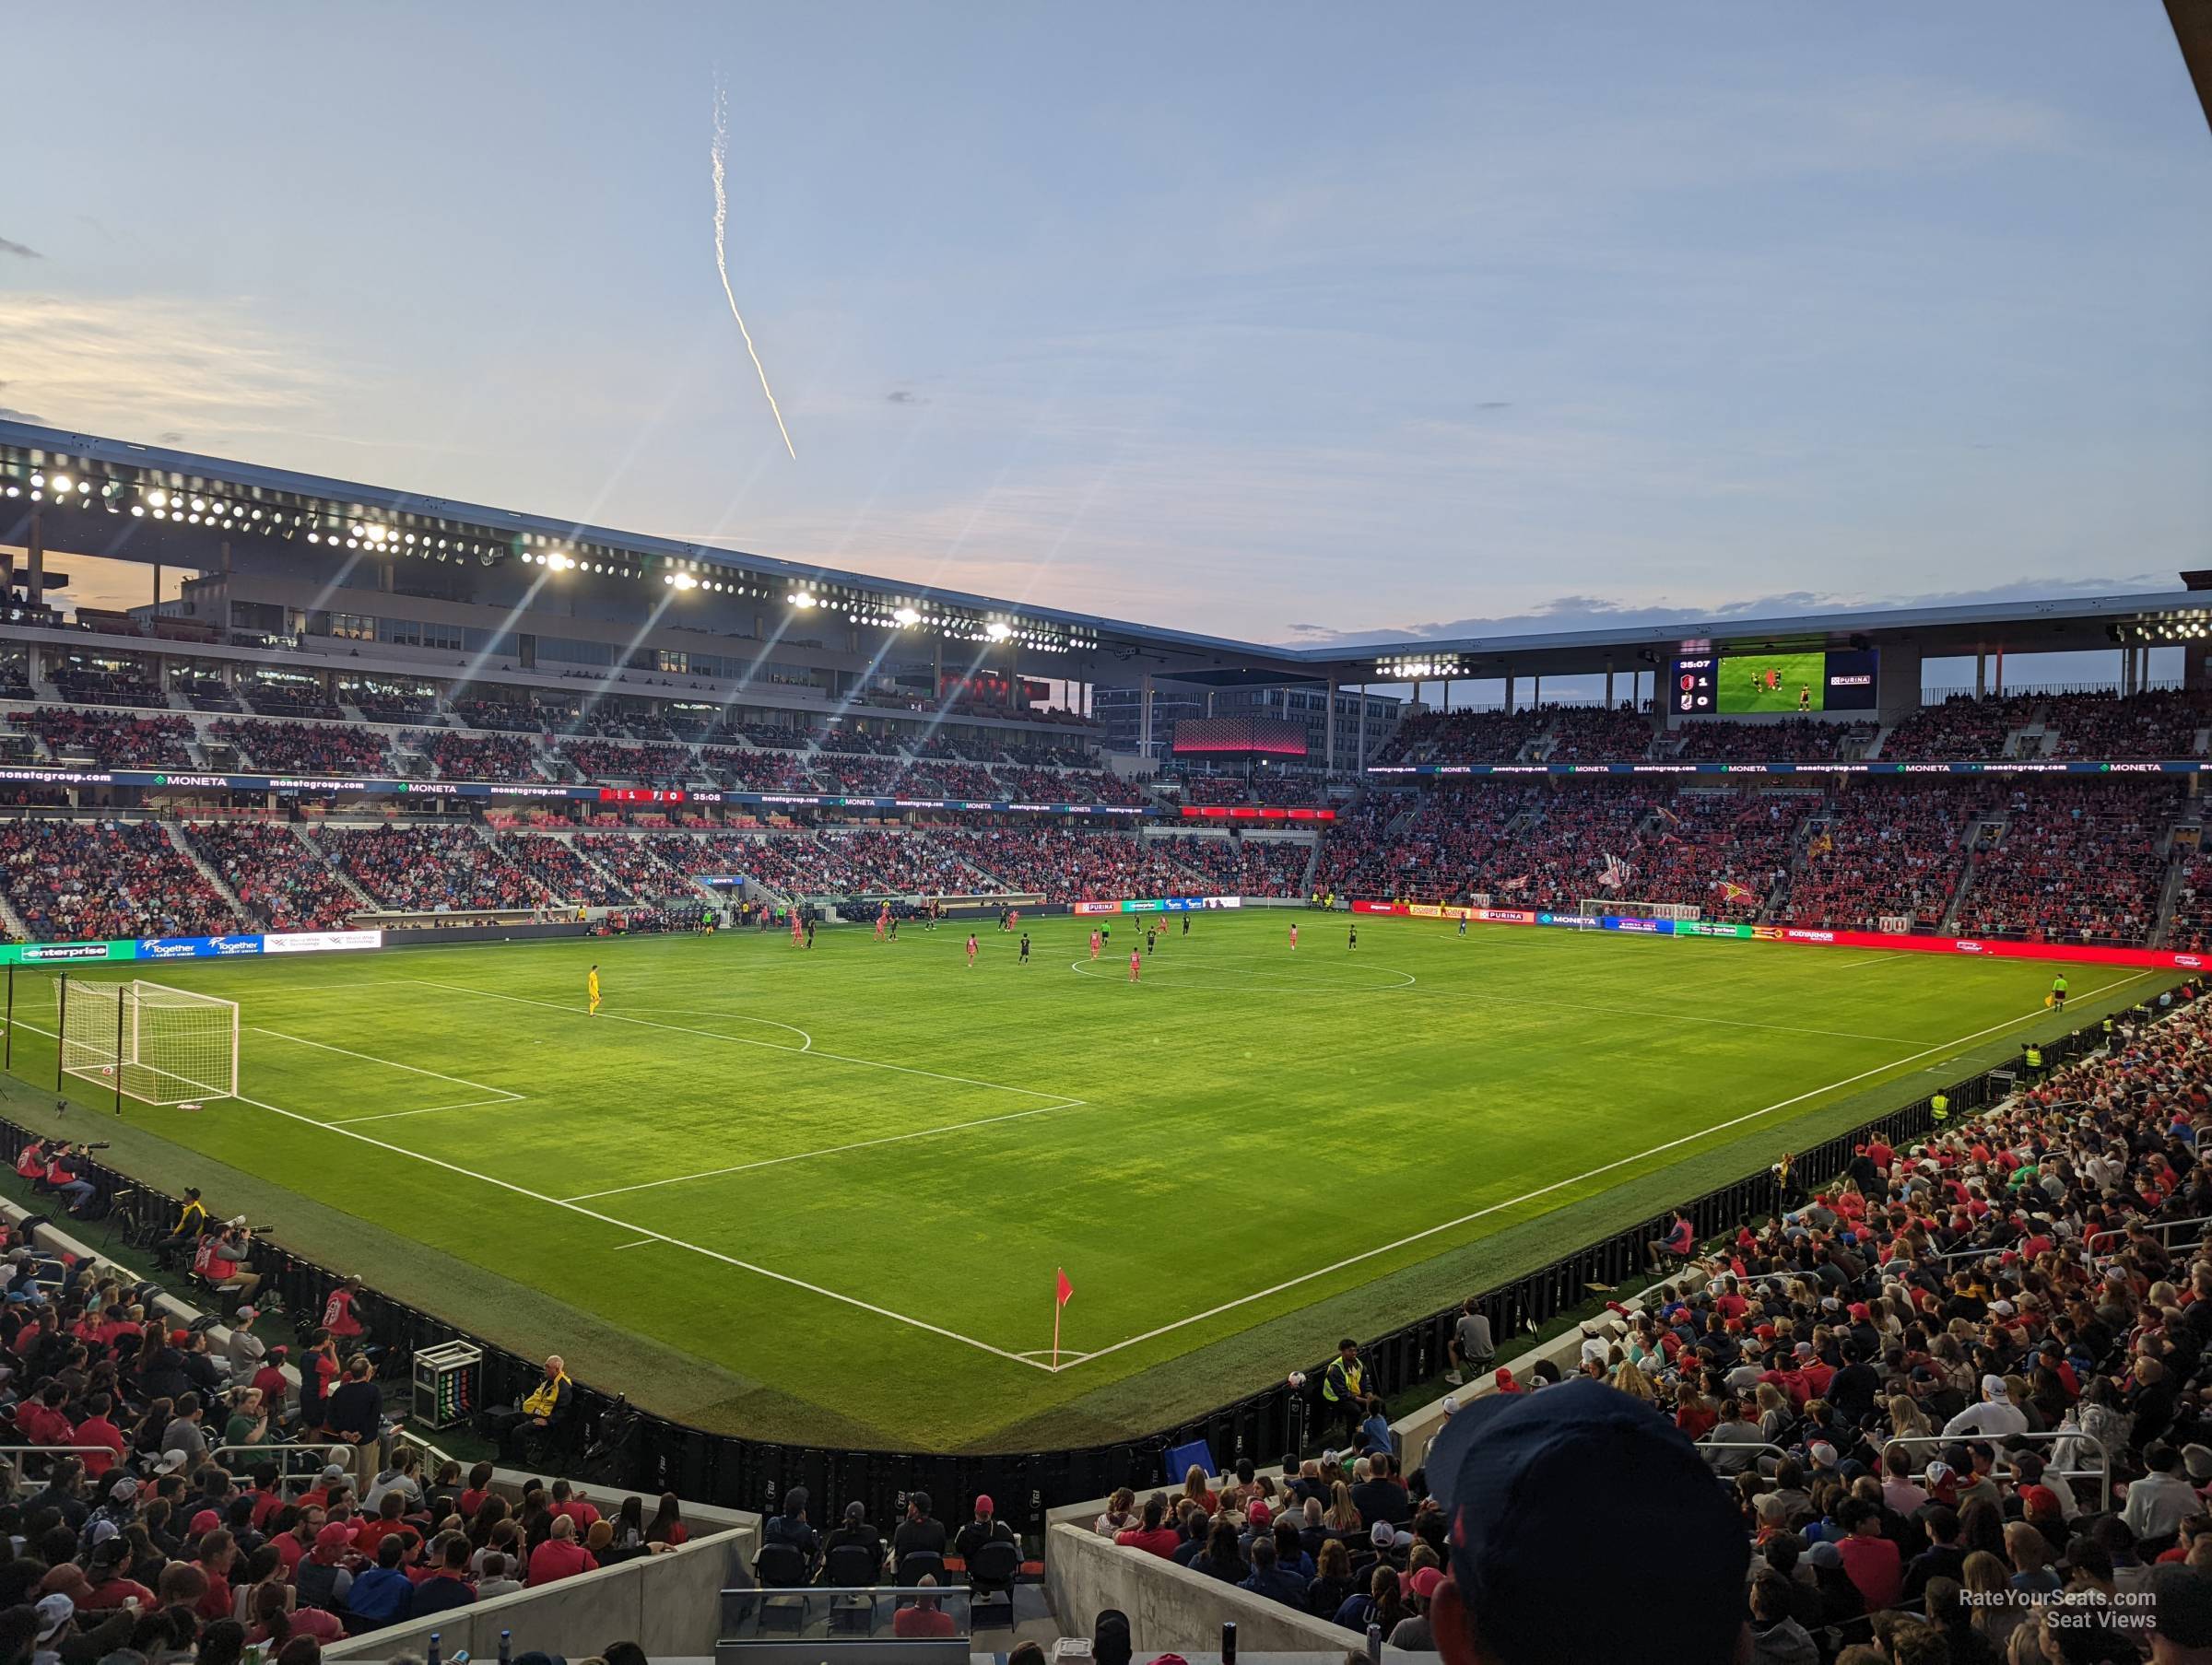 section 100, row 20 seat view  - citypark